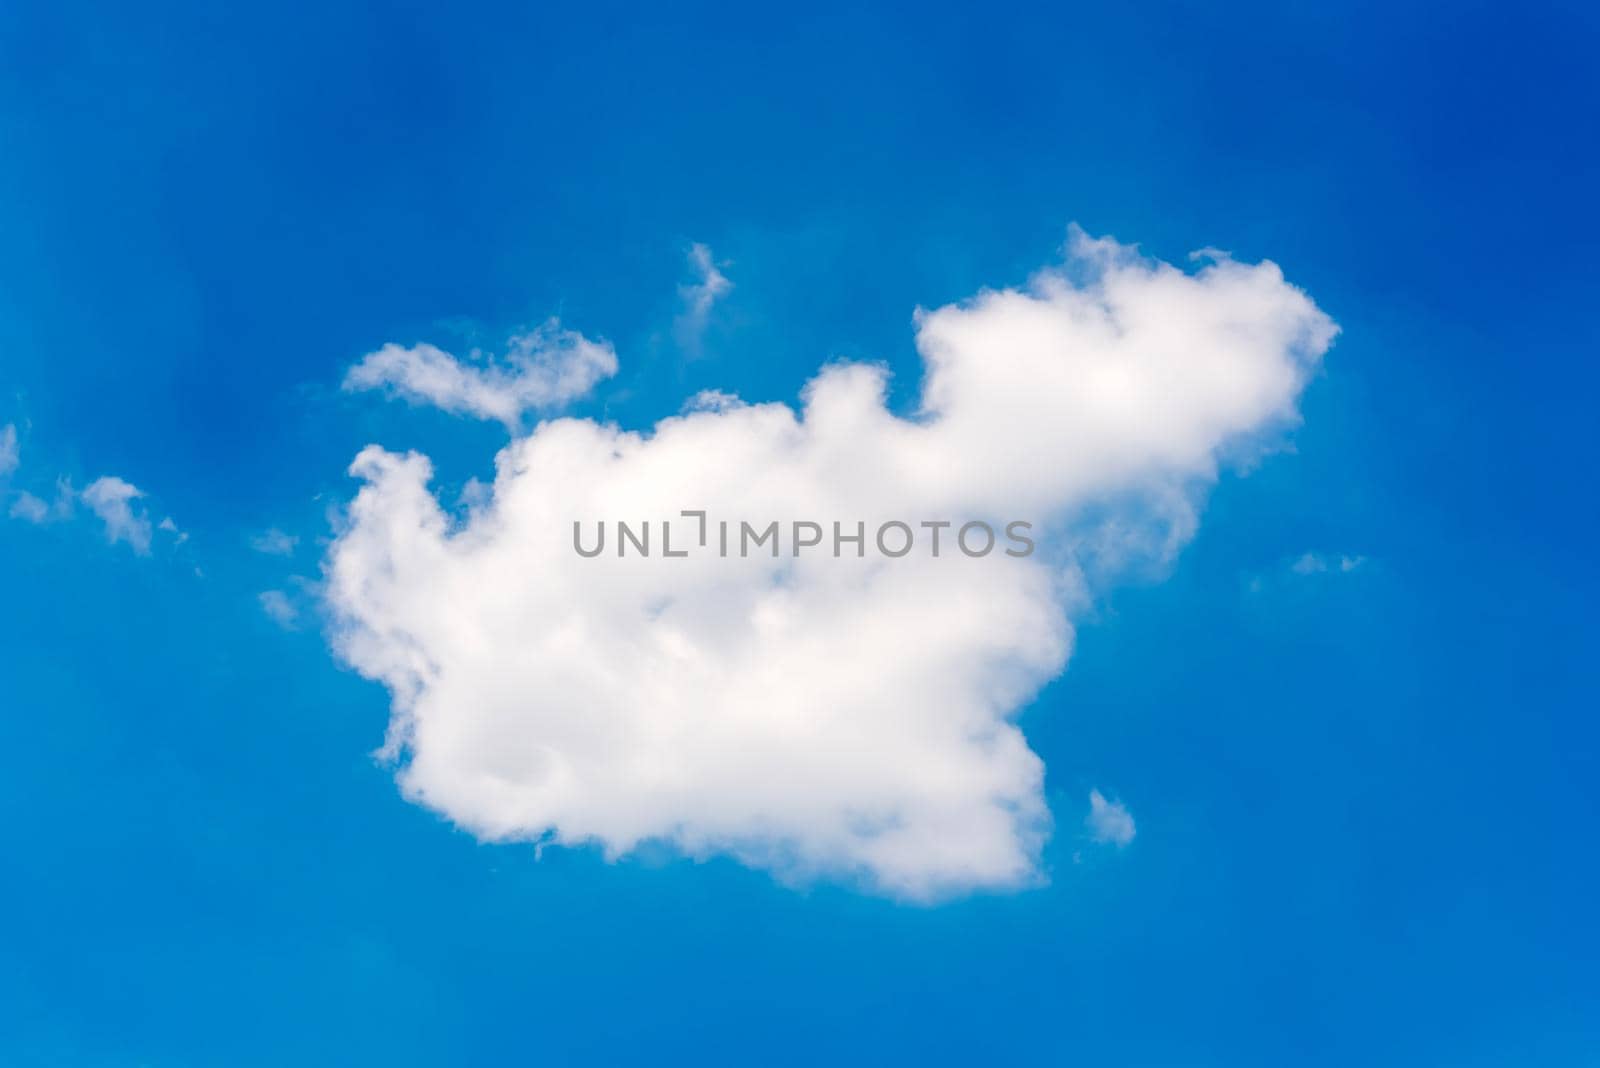 Beautiful Nature white cloud on blue sky background in daytime, summer season 